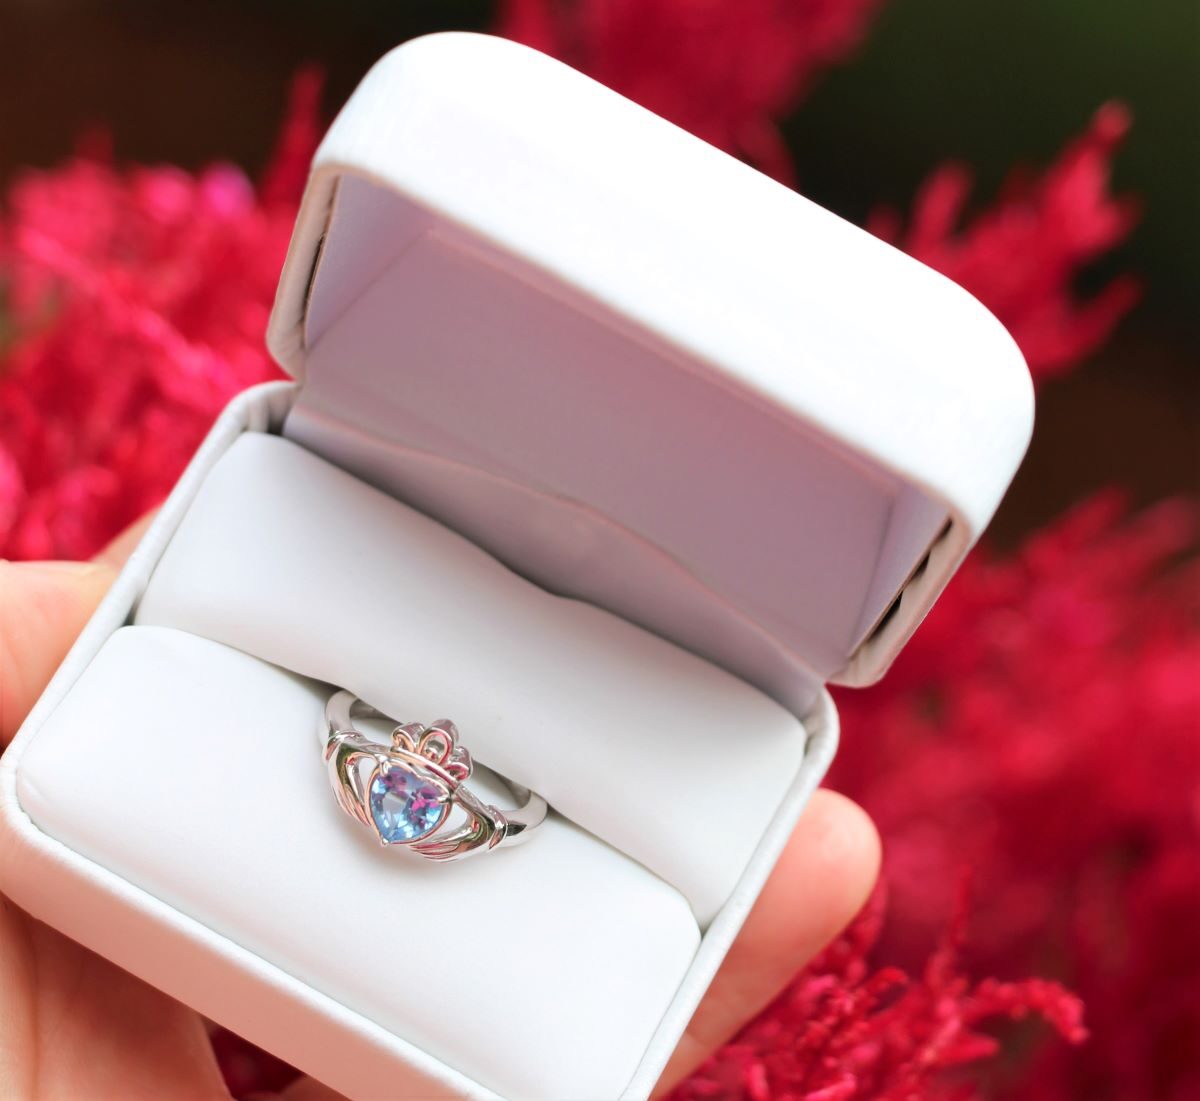 A Review of the Birthstone Claddagh Ring